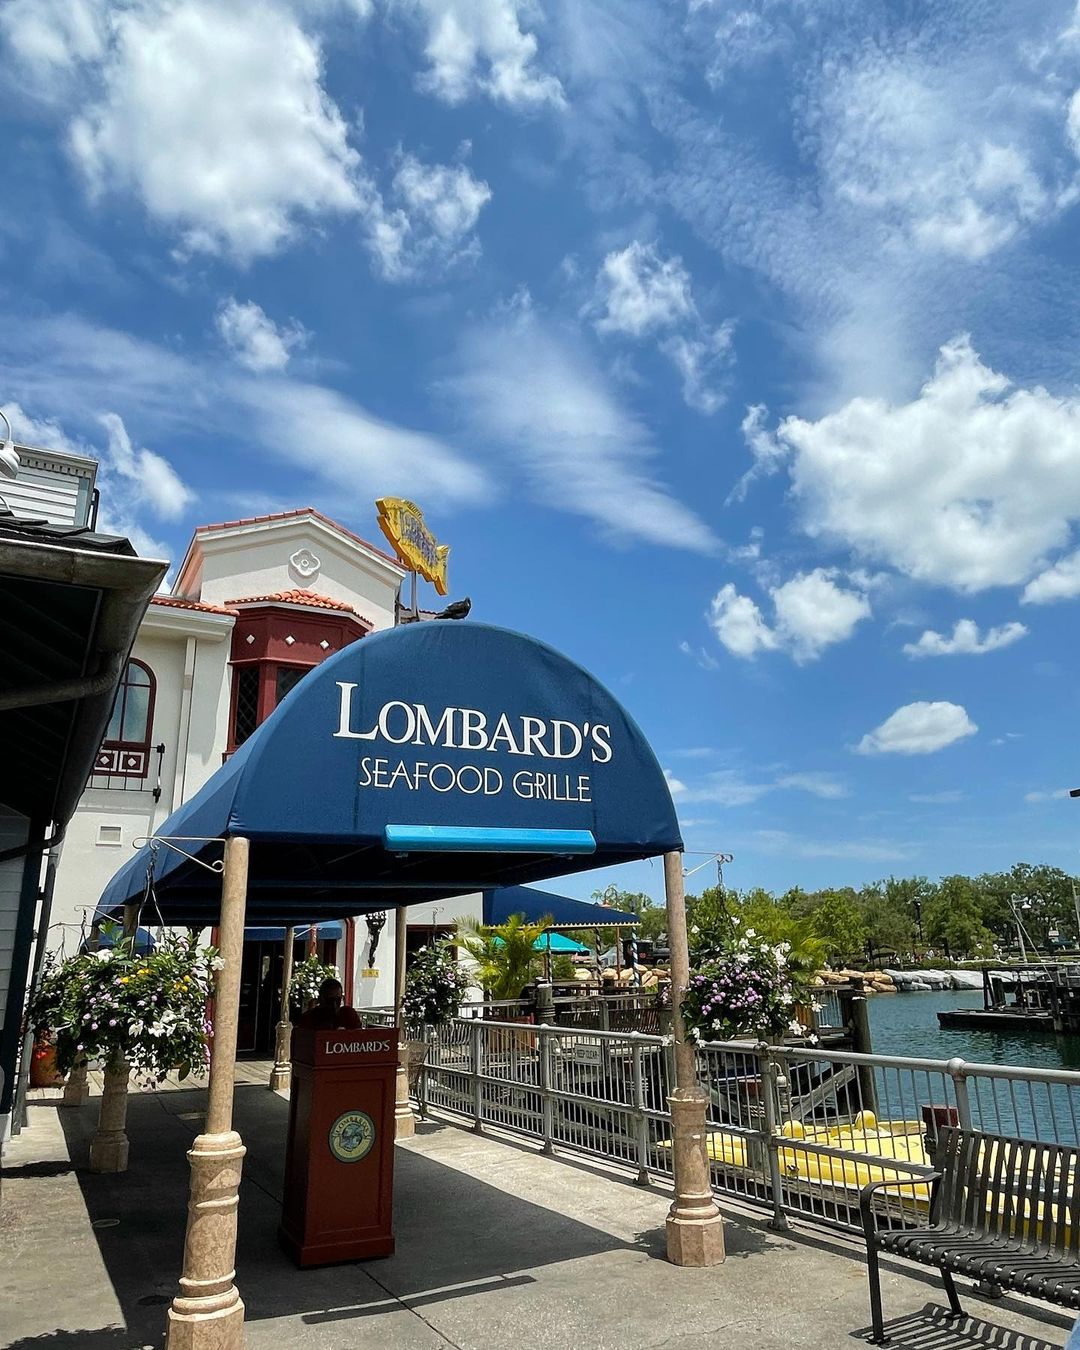 Lombards Seafood Grille-Fassade